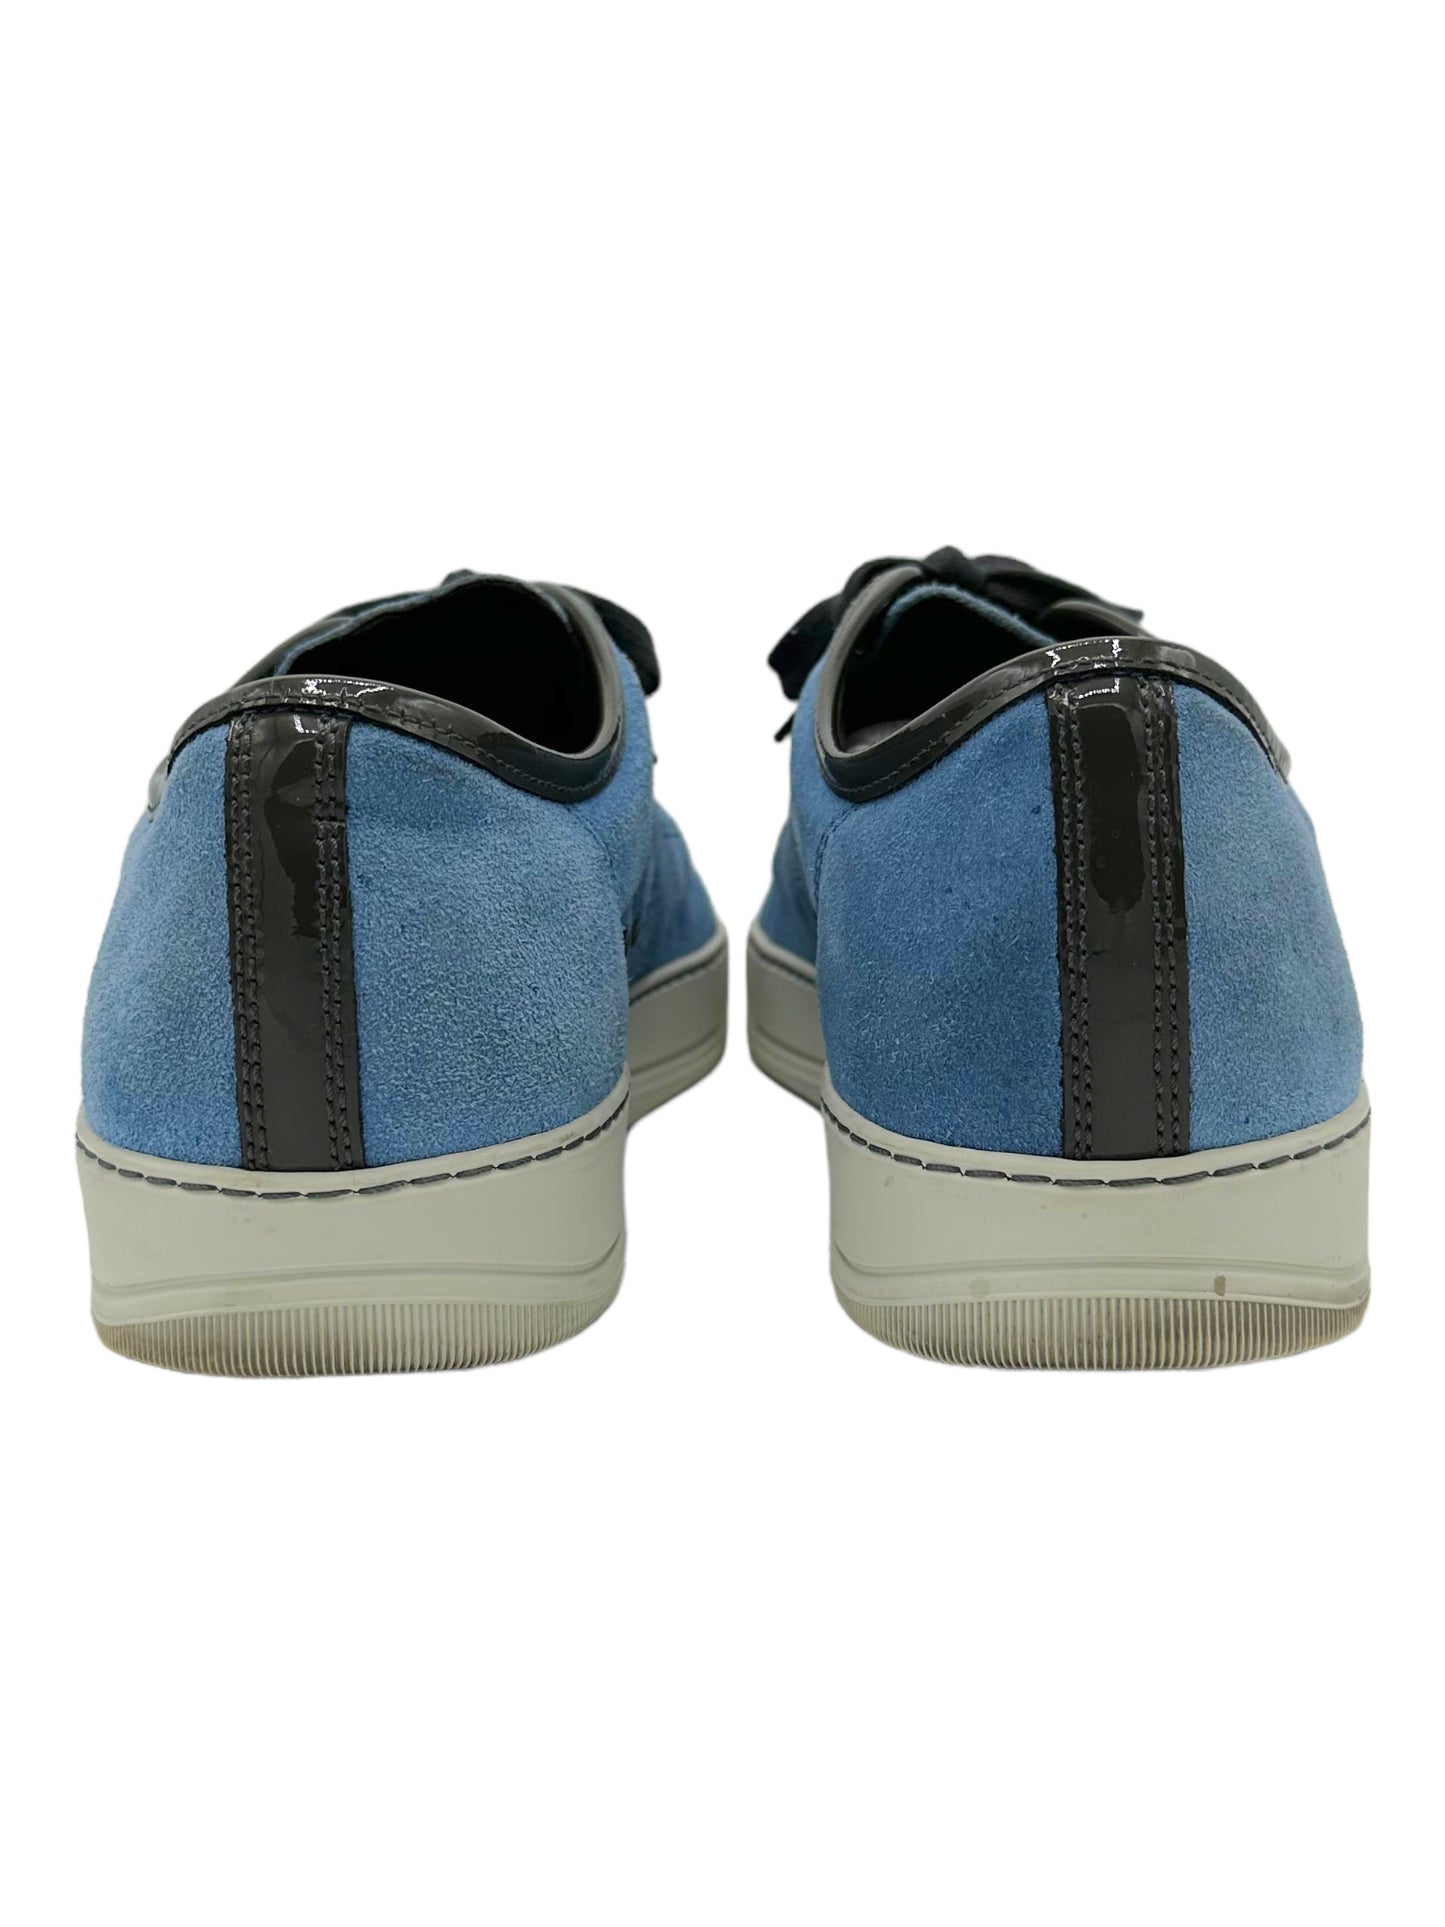 Lanvin Olive and Blue DBB1 Suede and Patent Leather Sneaker - Genuine Design Luxury Consignment for Men. New & Pre-Owned Clothing, Shoes, & Accessories. Calgary, Canada